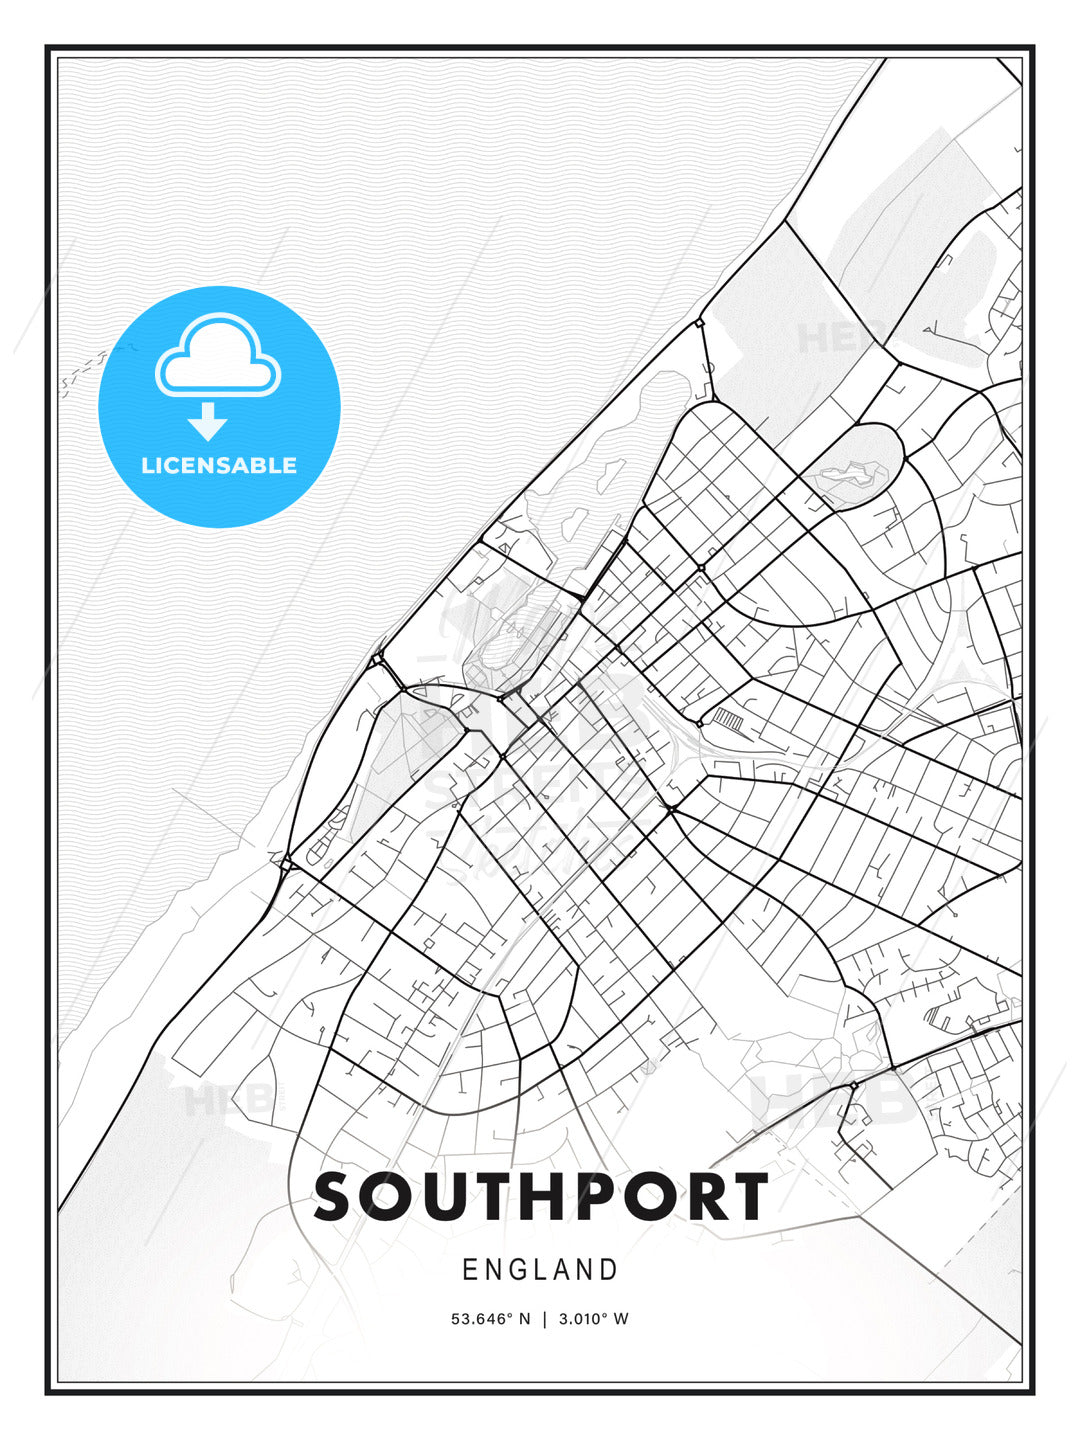 Southport, England, Modern Print Template in Various Formats - HEBSTREITS Sketches